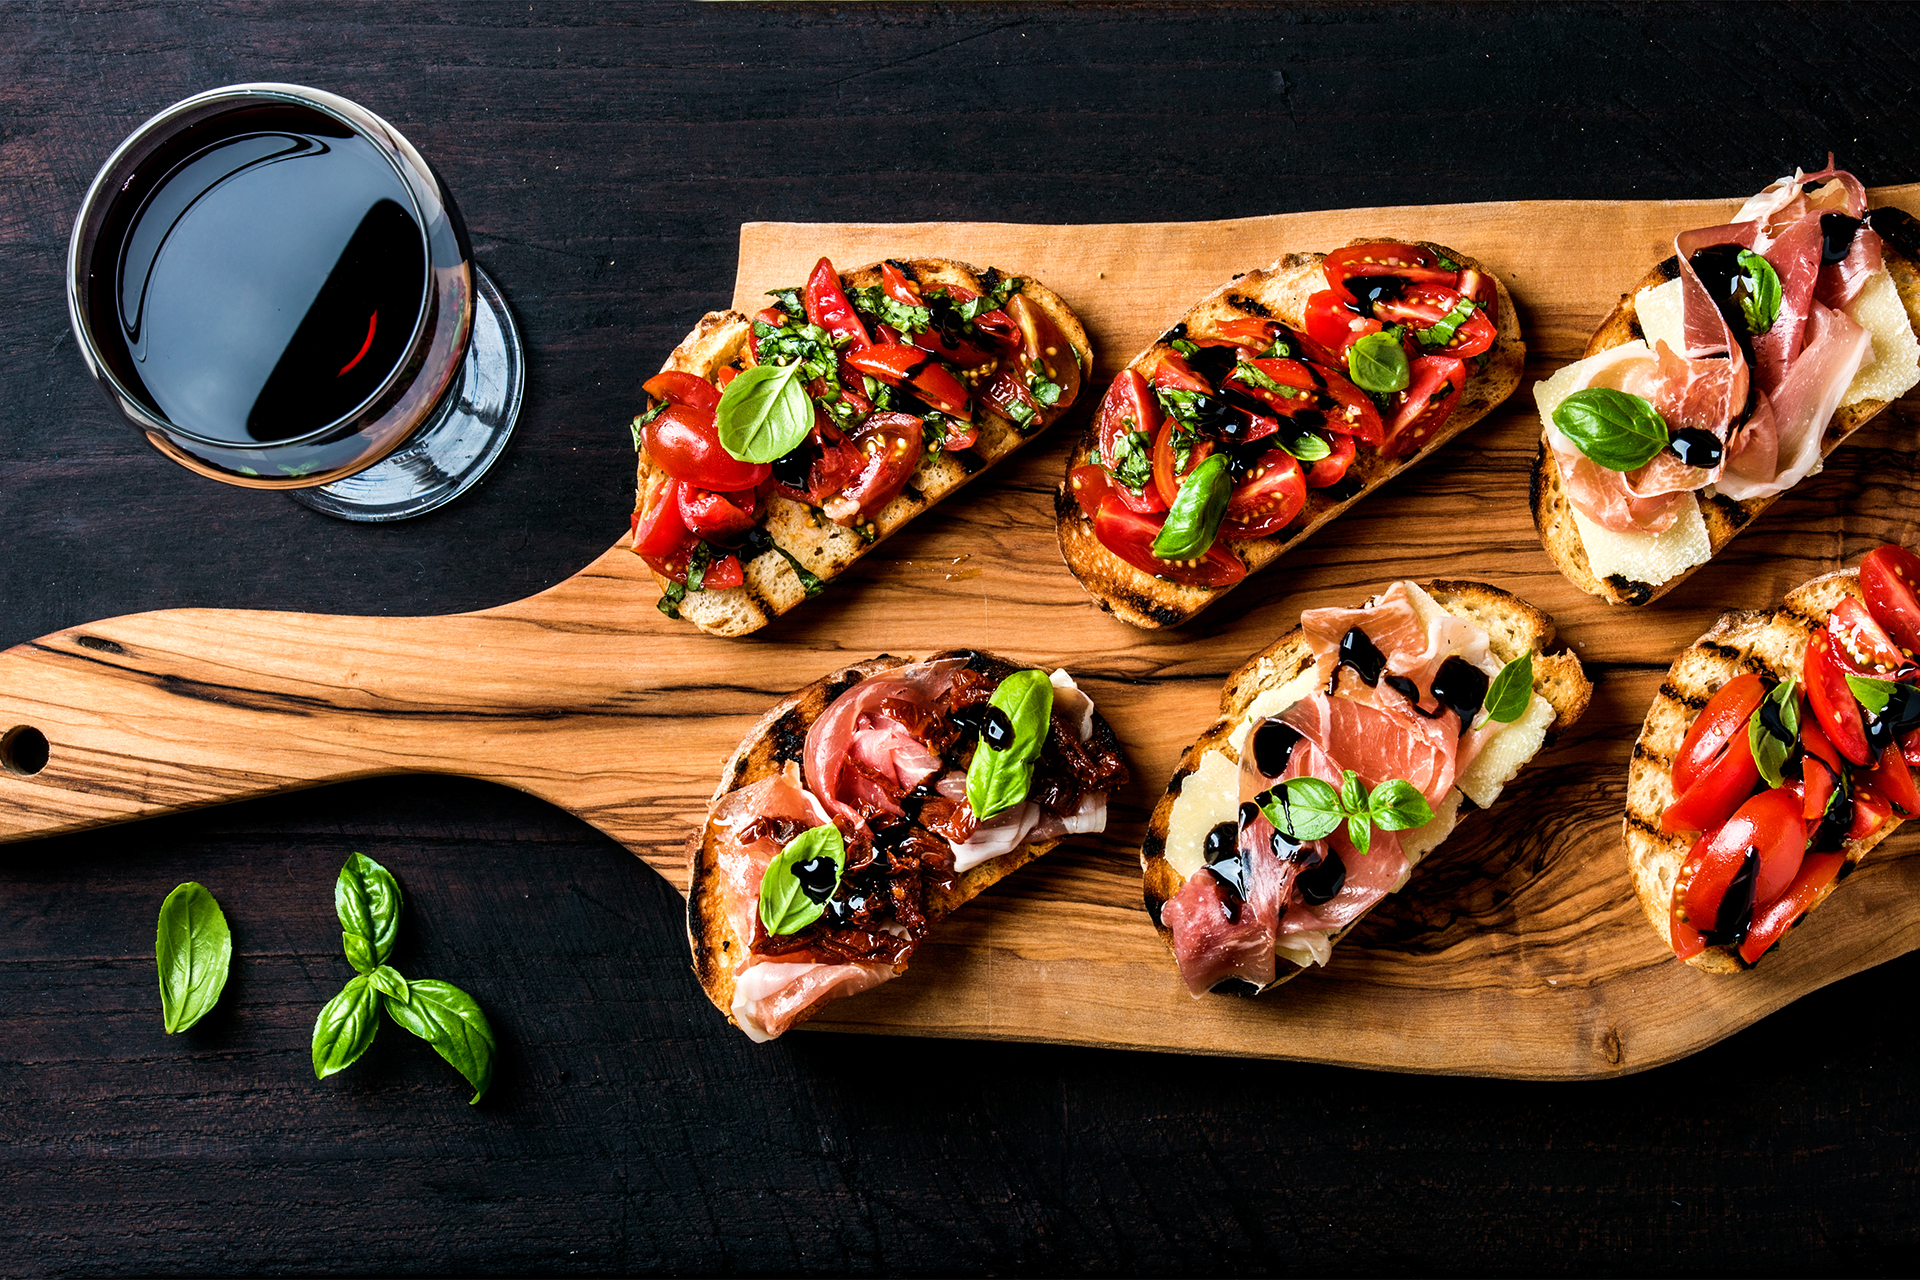 Brushetta set and glass of red wine. Small sandwiches with